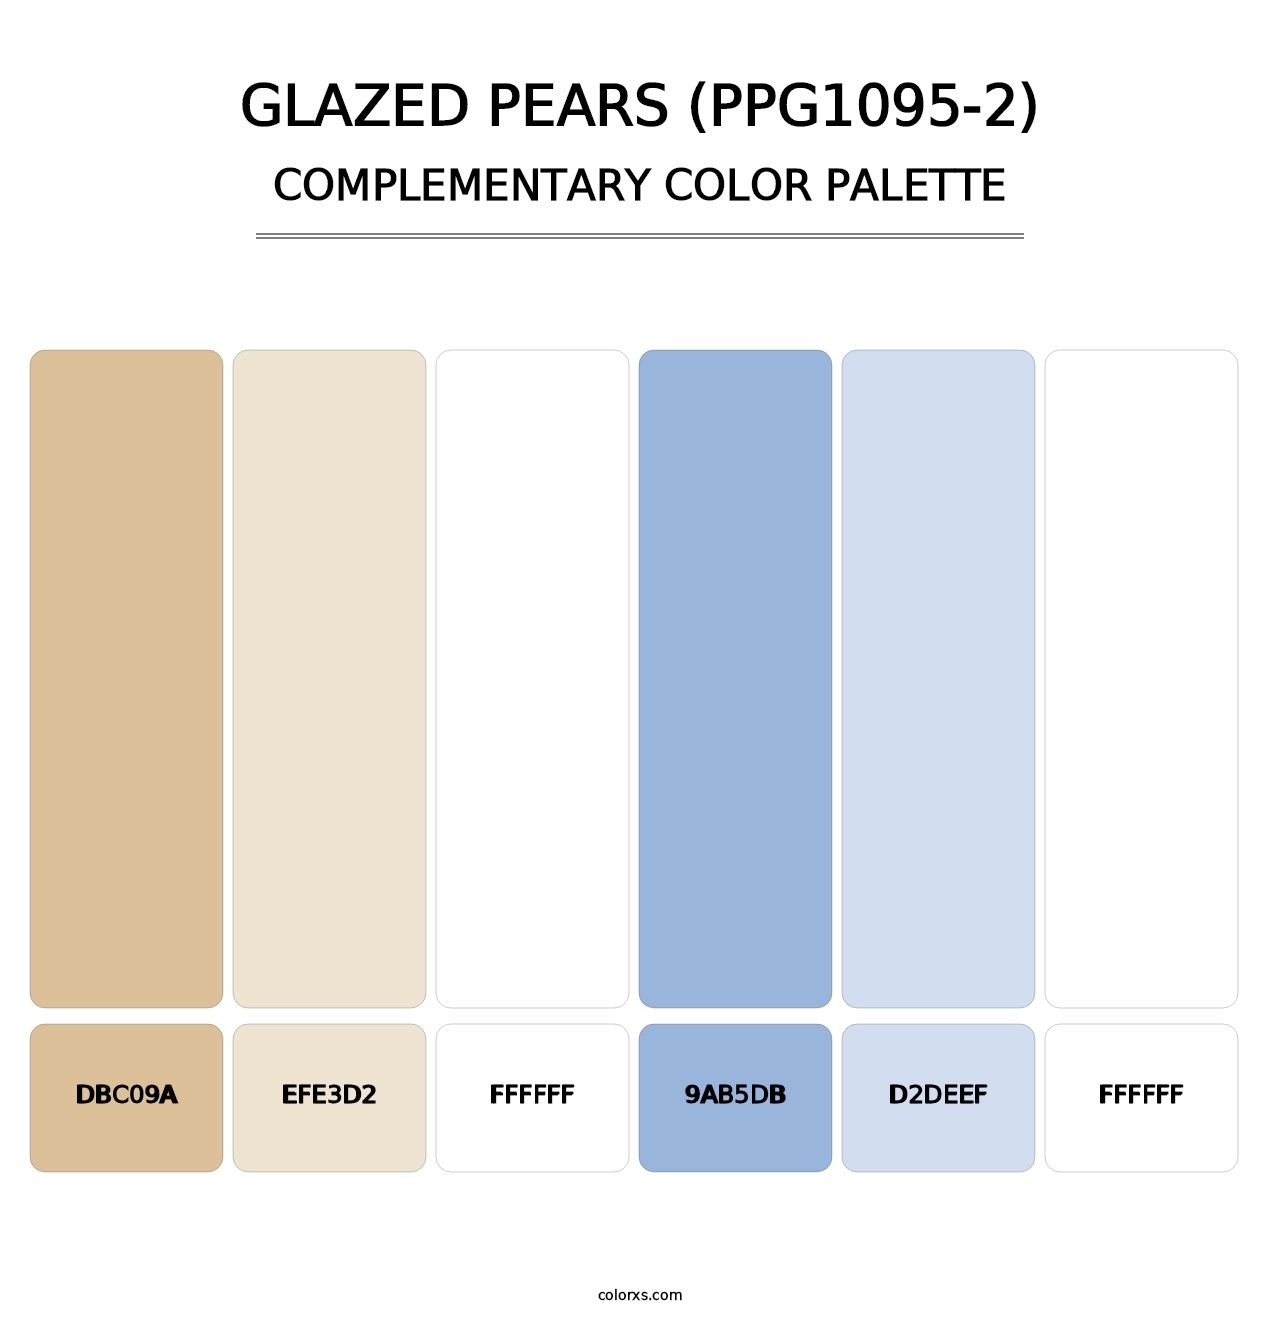 Glazed Pears (PPG1095-2) - Complementary Color Palette